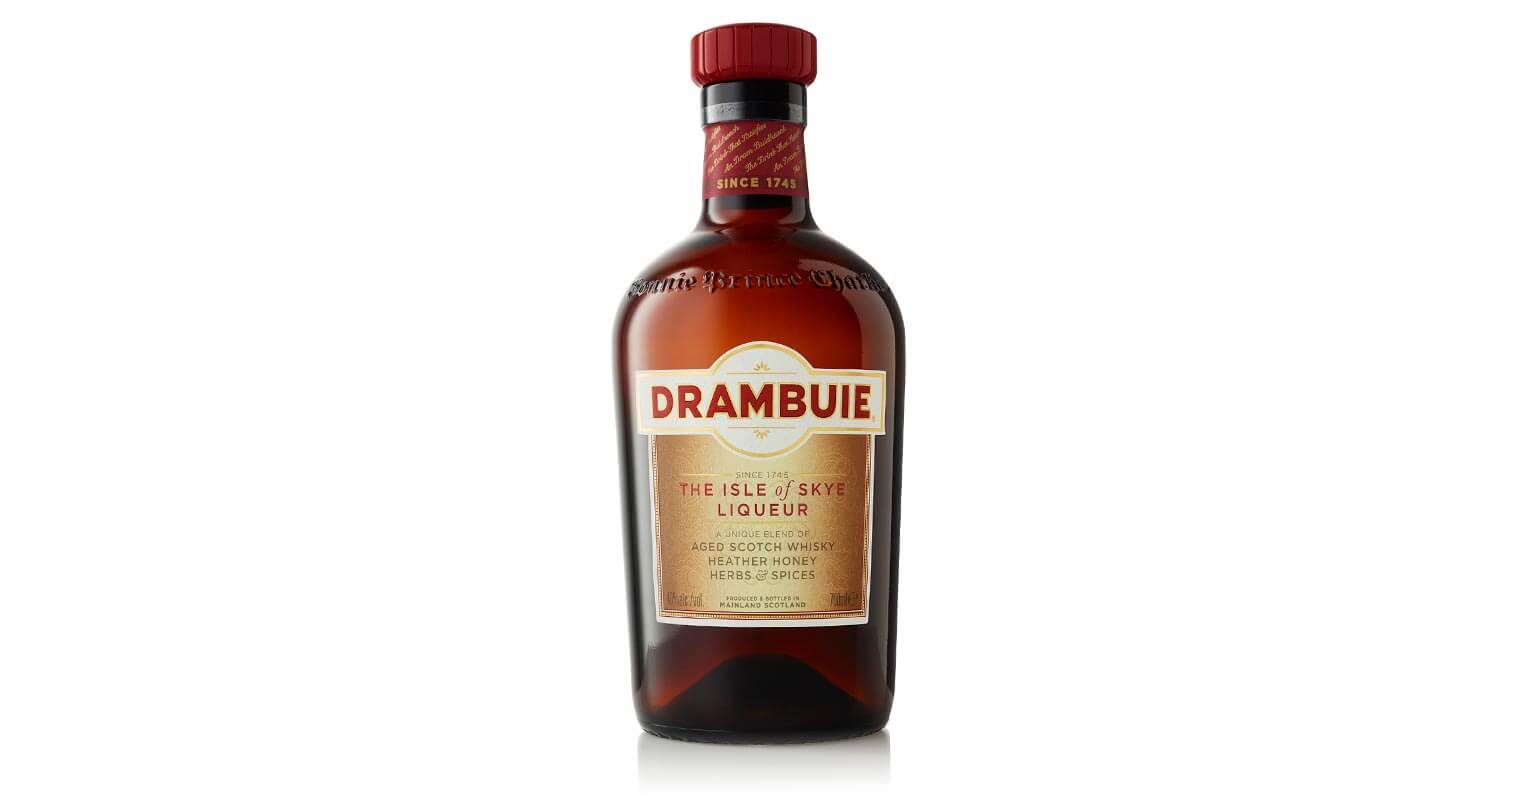 Drambuie Relaunches with Release of New Bottle Design, featured image